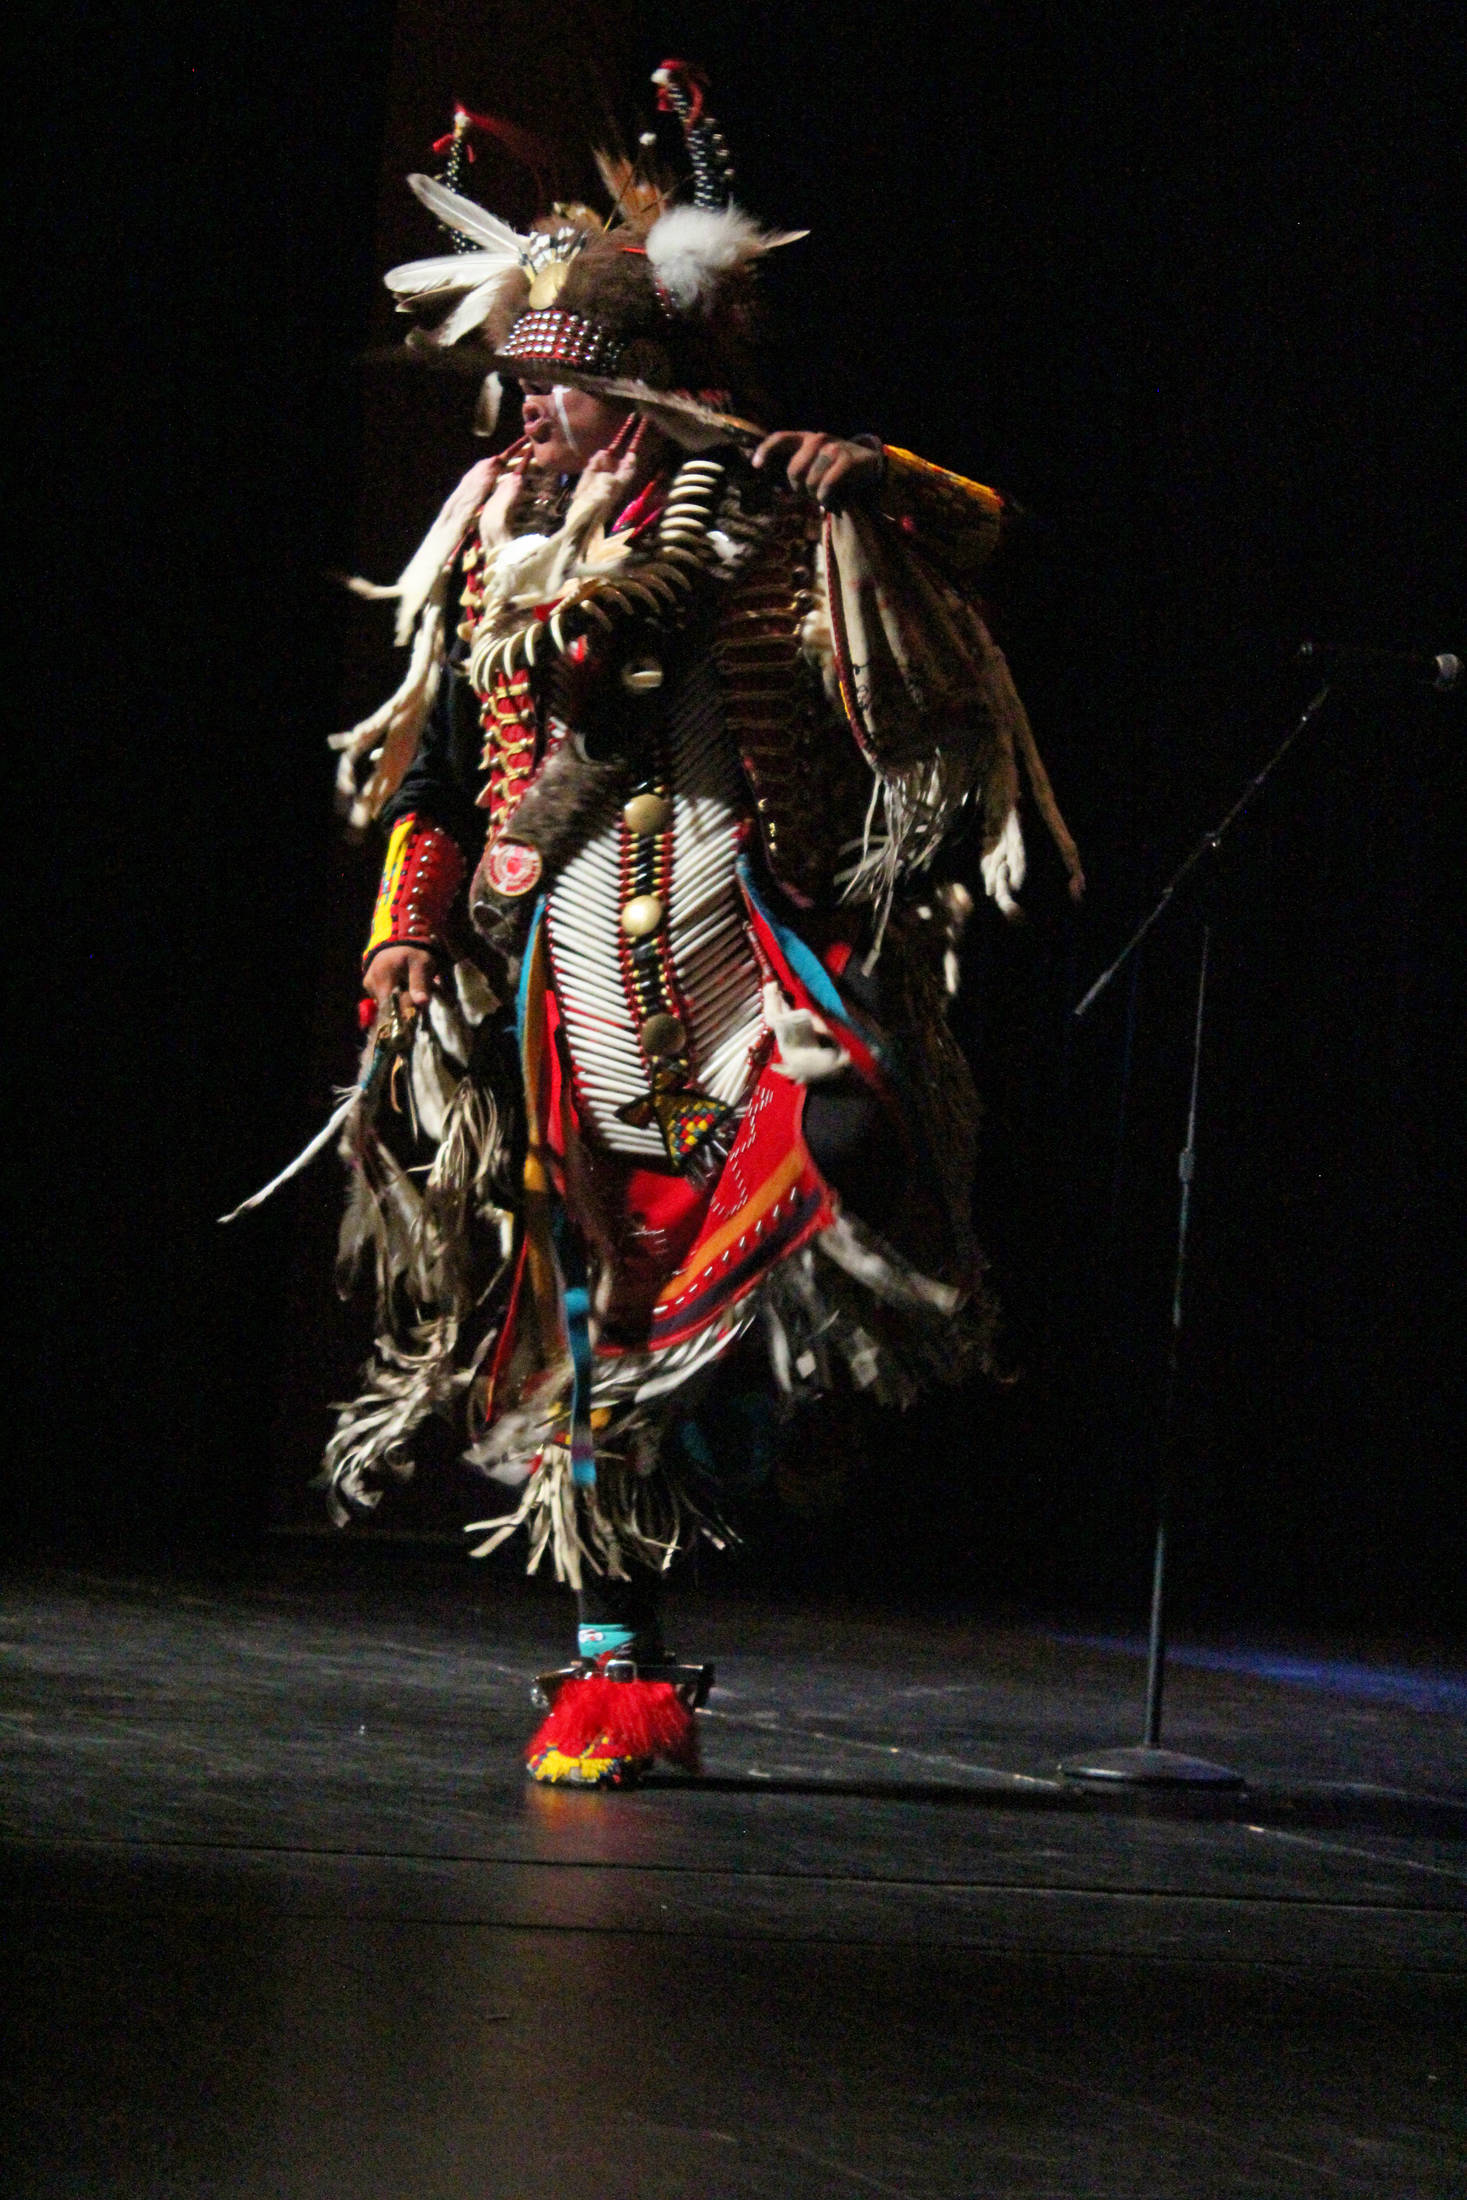 Joshua Atcheynum performs a dance called “Custer’s Last Stand” on Thursday, Sept. 6, 2018 at the Homer High School Mariner Theatre in Homer, Alaska. (Photo by Megan Pacer/Homer News)